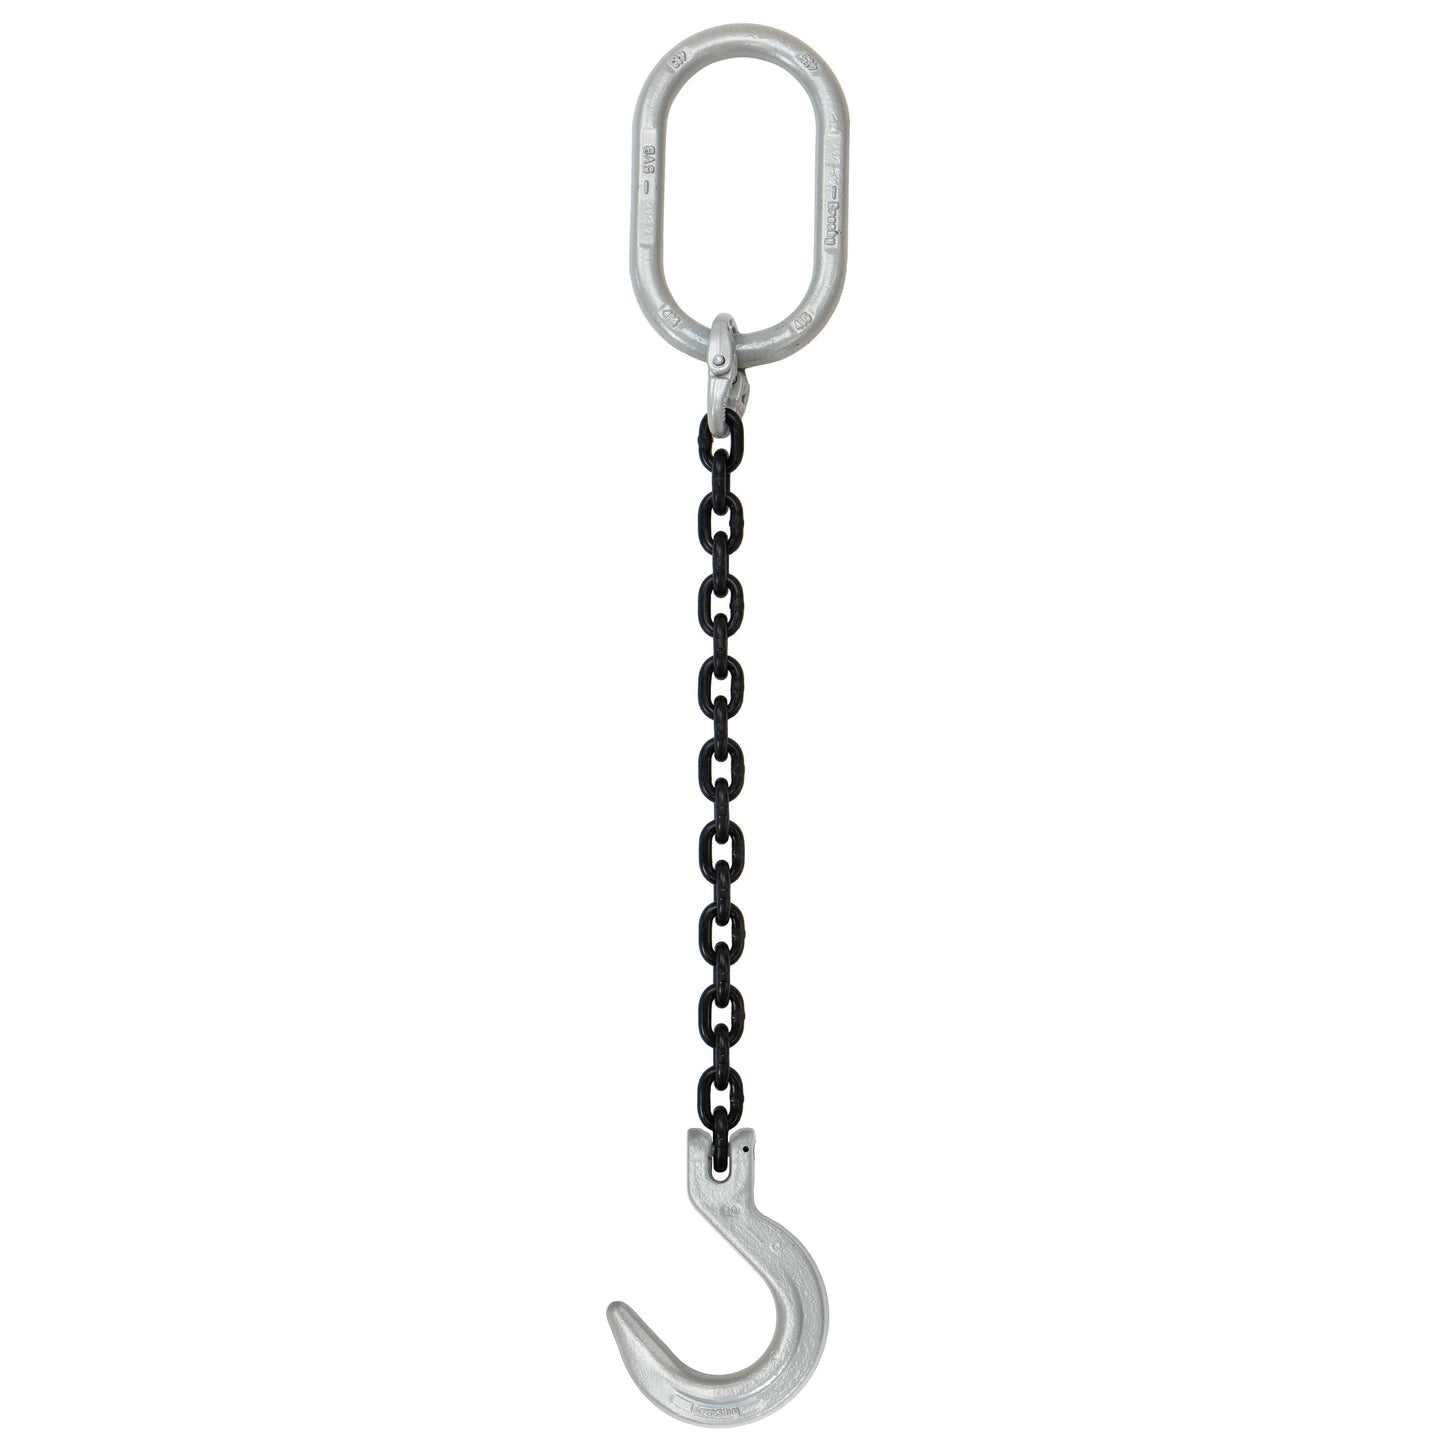 38 inch x 20 foot Domestic Single Leg Chain Sling w Crosby Foundry Hook Grade 100 image 1 of 2